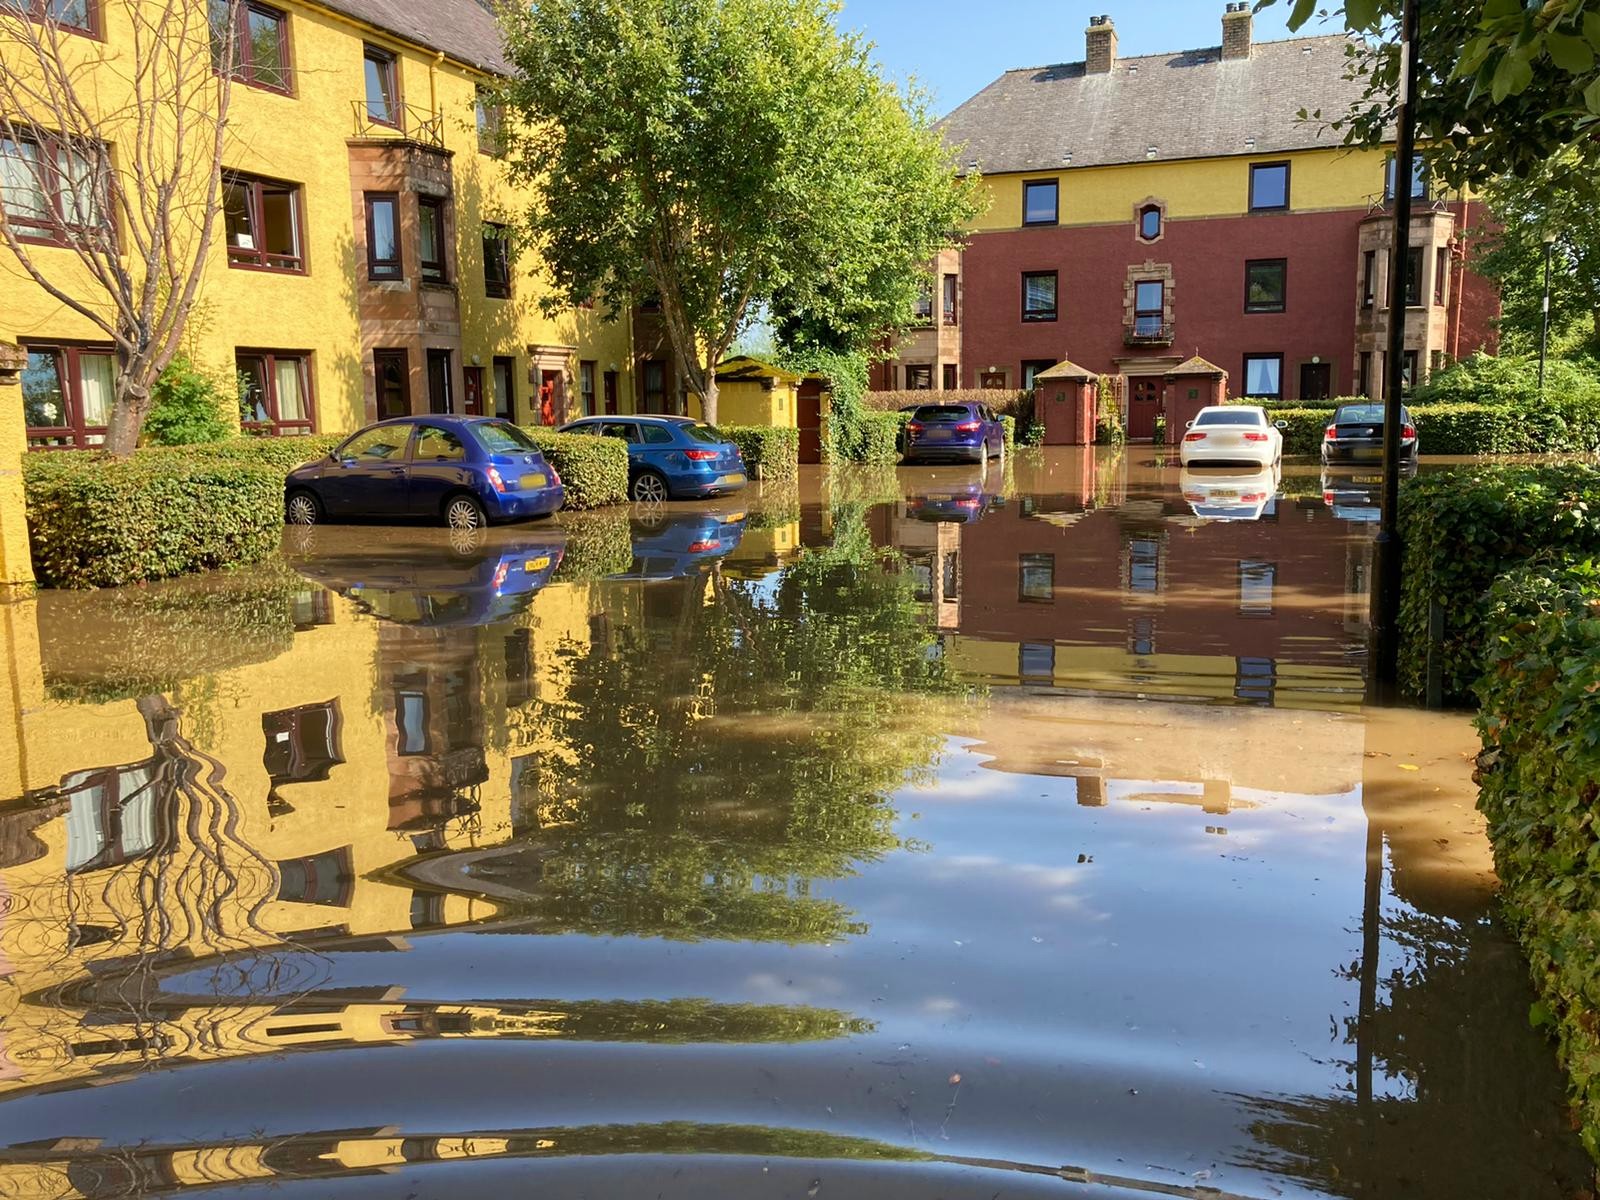 Fairfield welcomes tenants back into homes after flooding